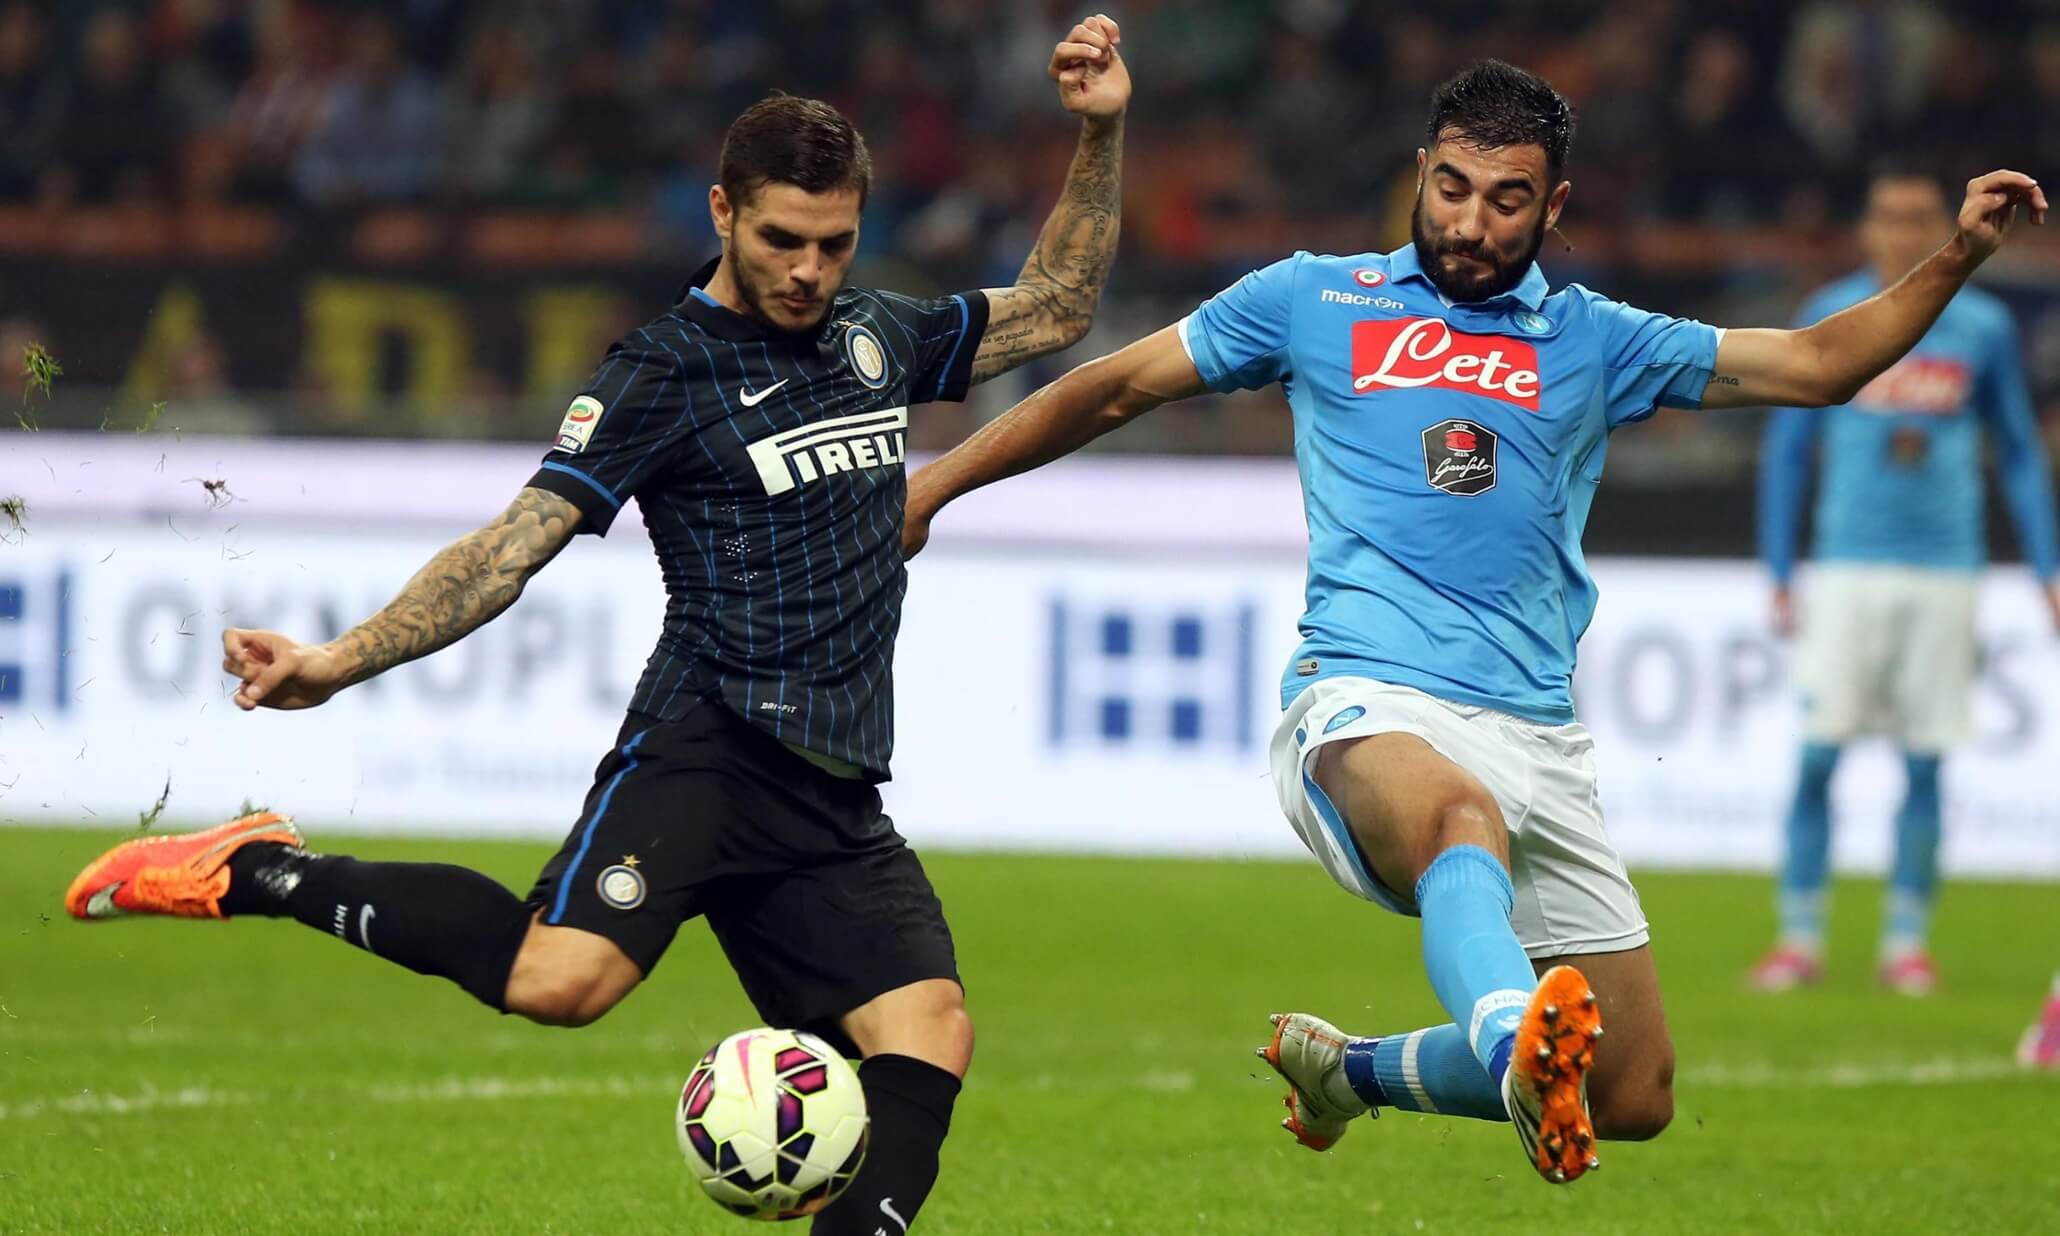 epa04454014 Fc Inter forward Mauro Icardi (left) in action with Ssc Napoli defender Raul Albiol during the Italian Serie A soccer match between Fc Inter and Ssc Napoli at Giuseppe Meazza stadium in Milan, Italy, 19 October 2014. EPA/MATTEO BAZZI